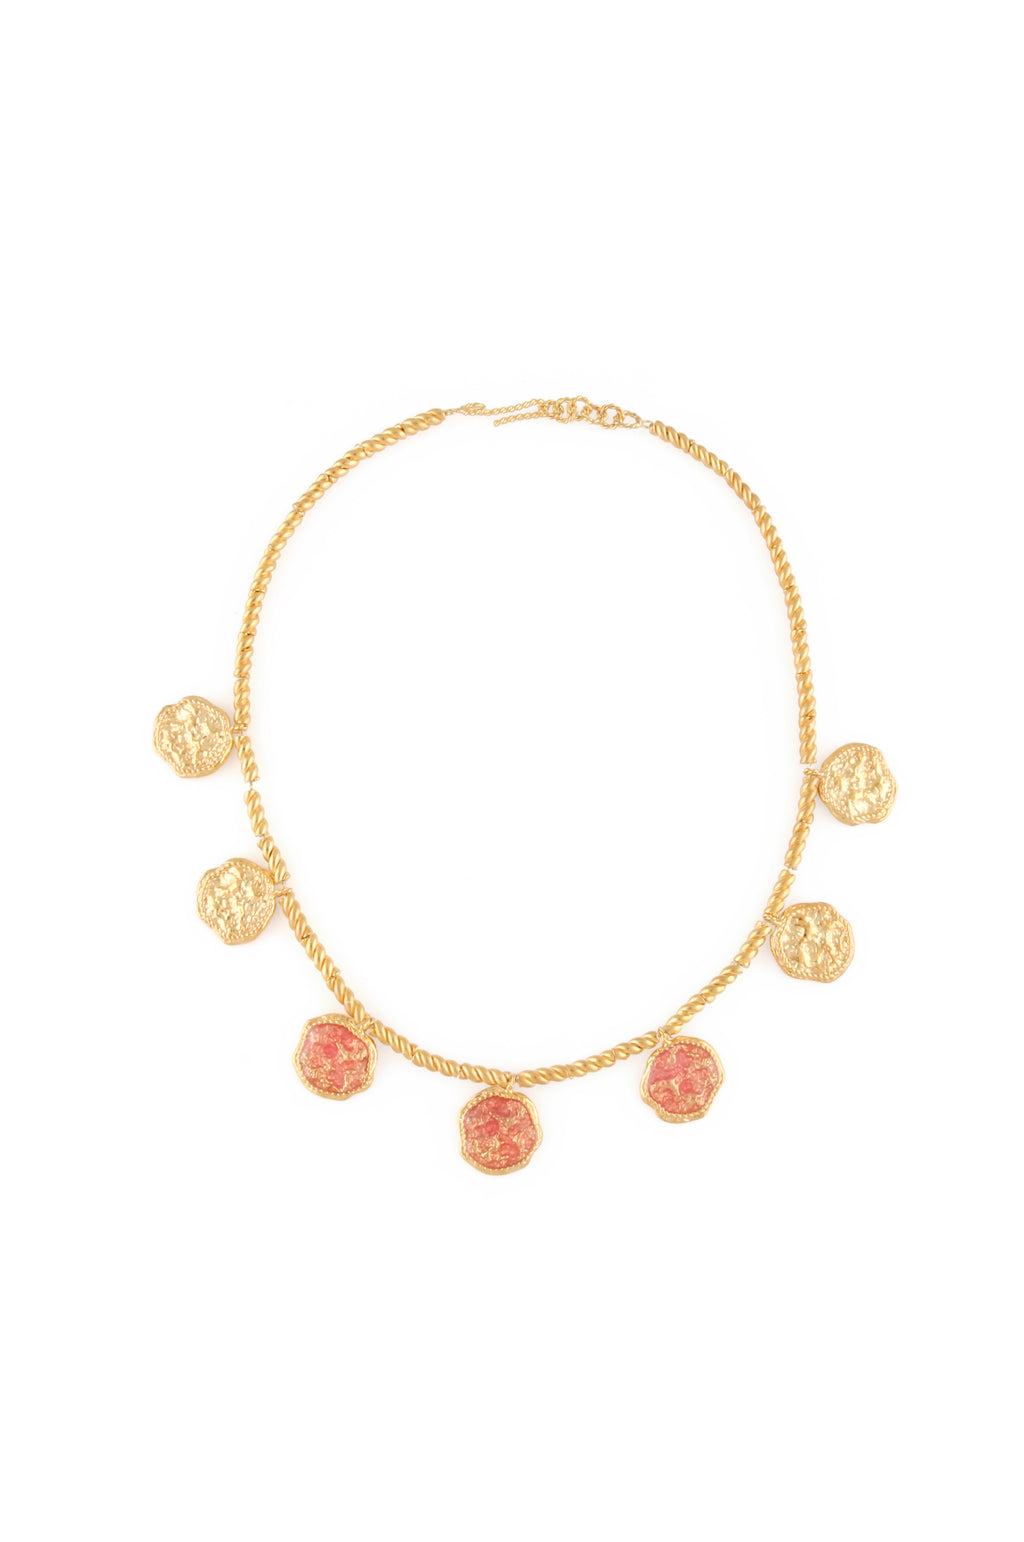 GOLD PLATED FEMININE WAVES NECKLACE WITH ENAMEL